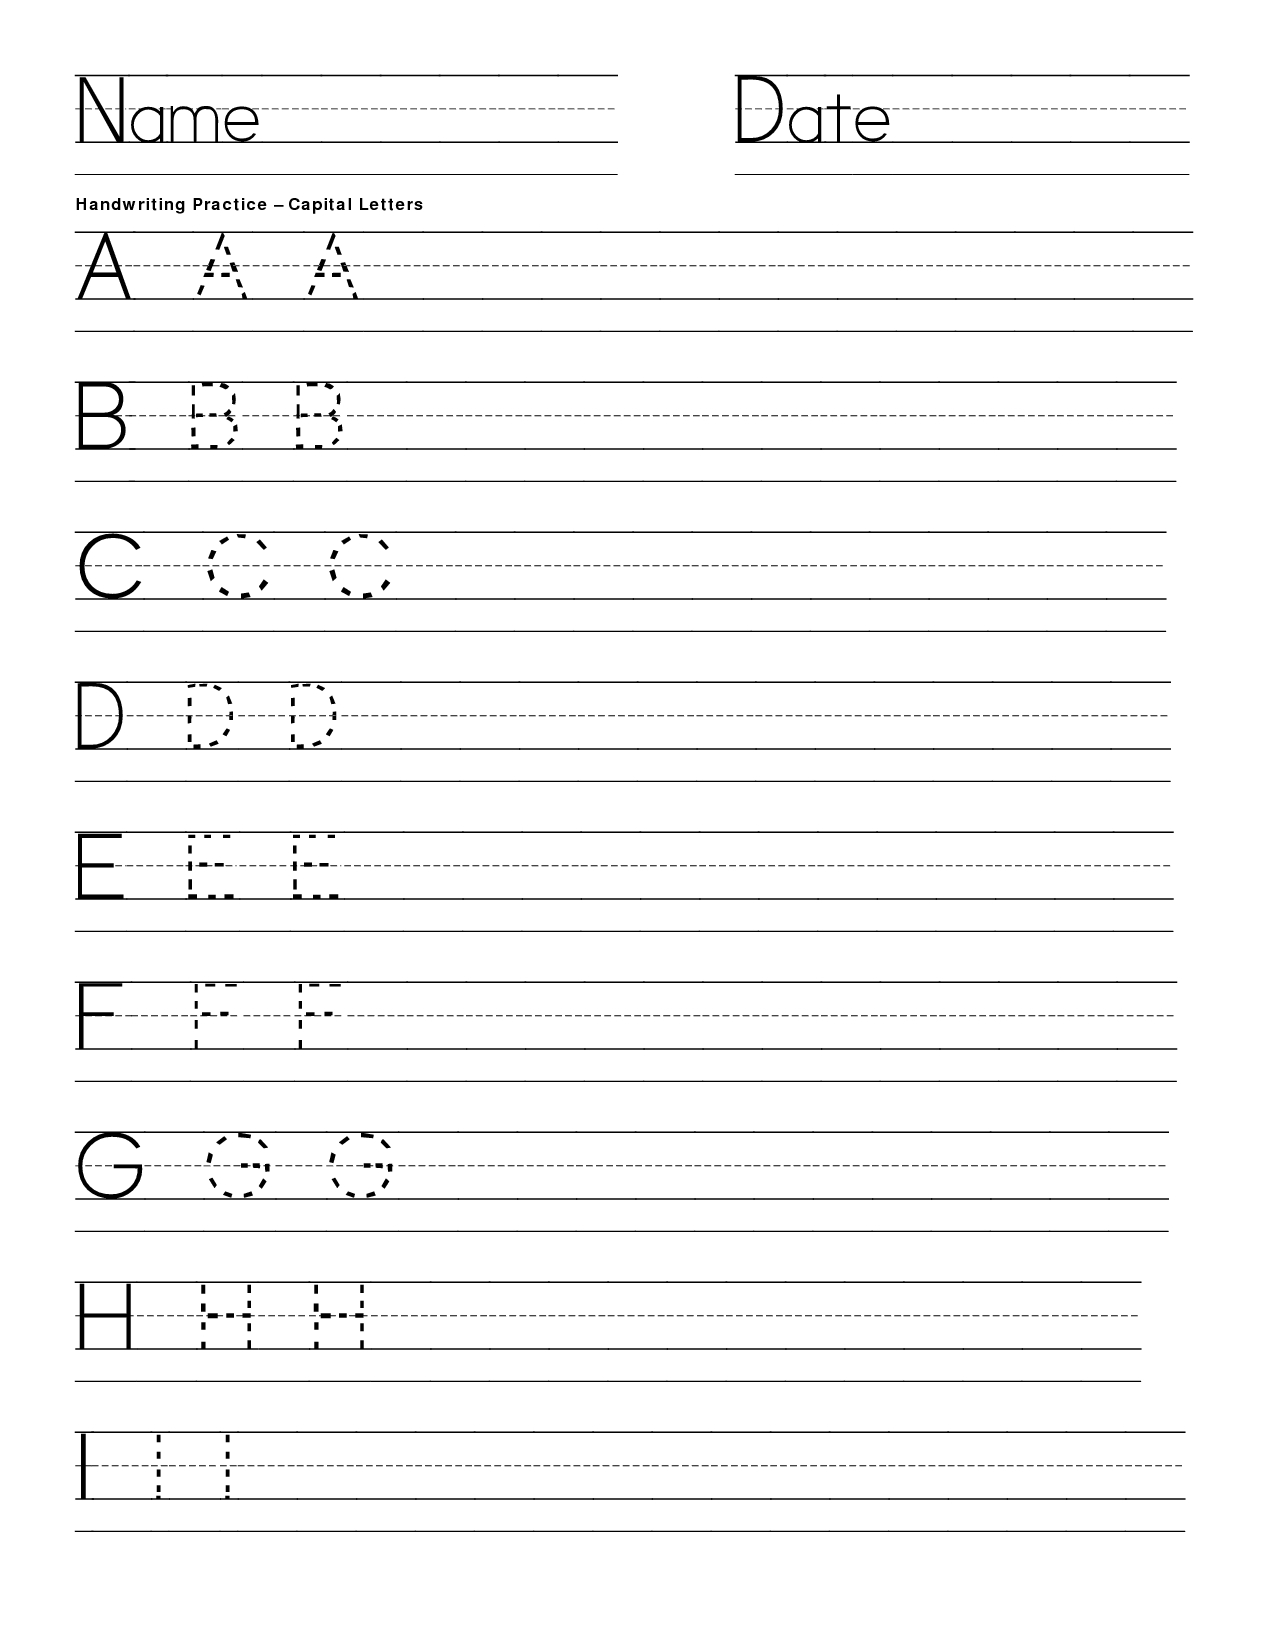 Practice Letter Sheets | Free Handwriting Worksheets for Practice Tracing Letters